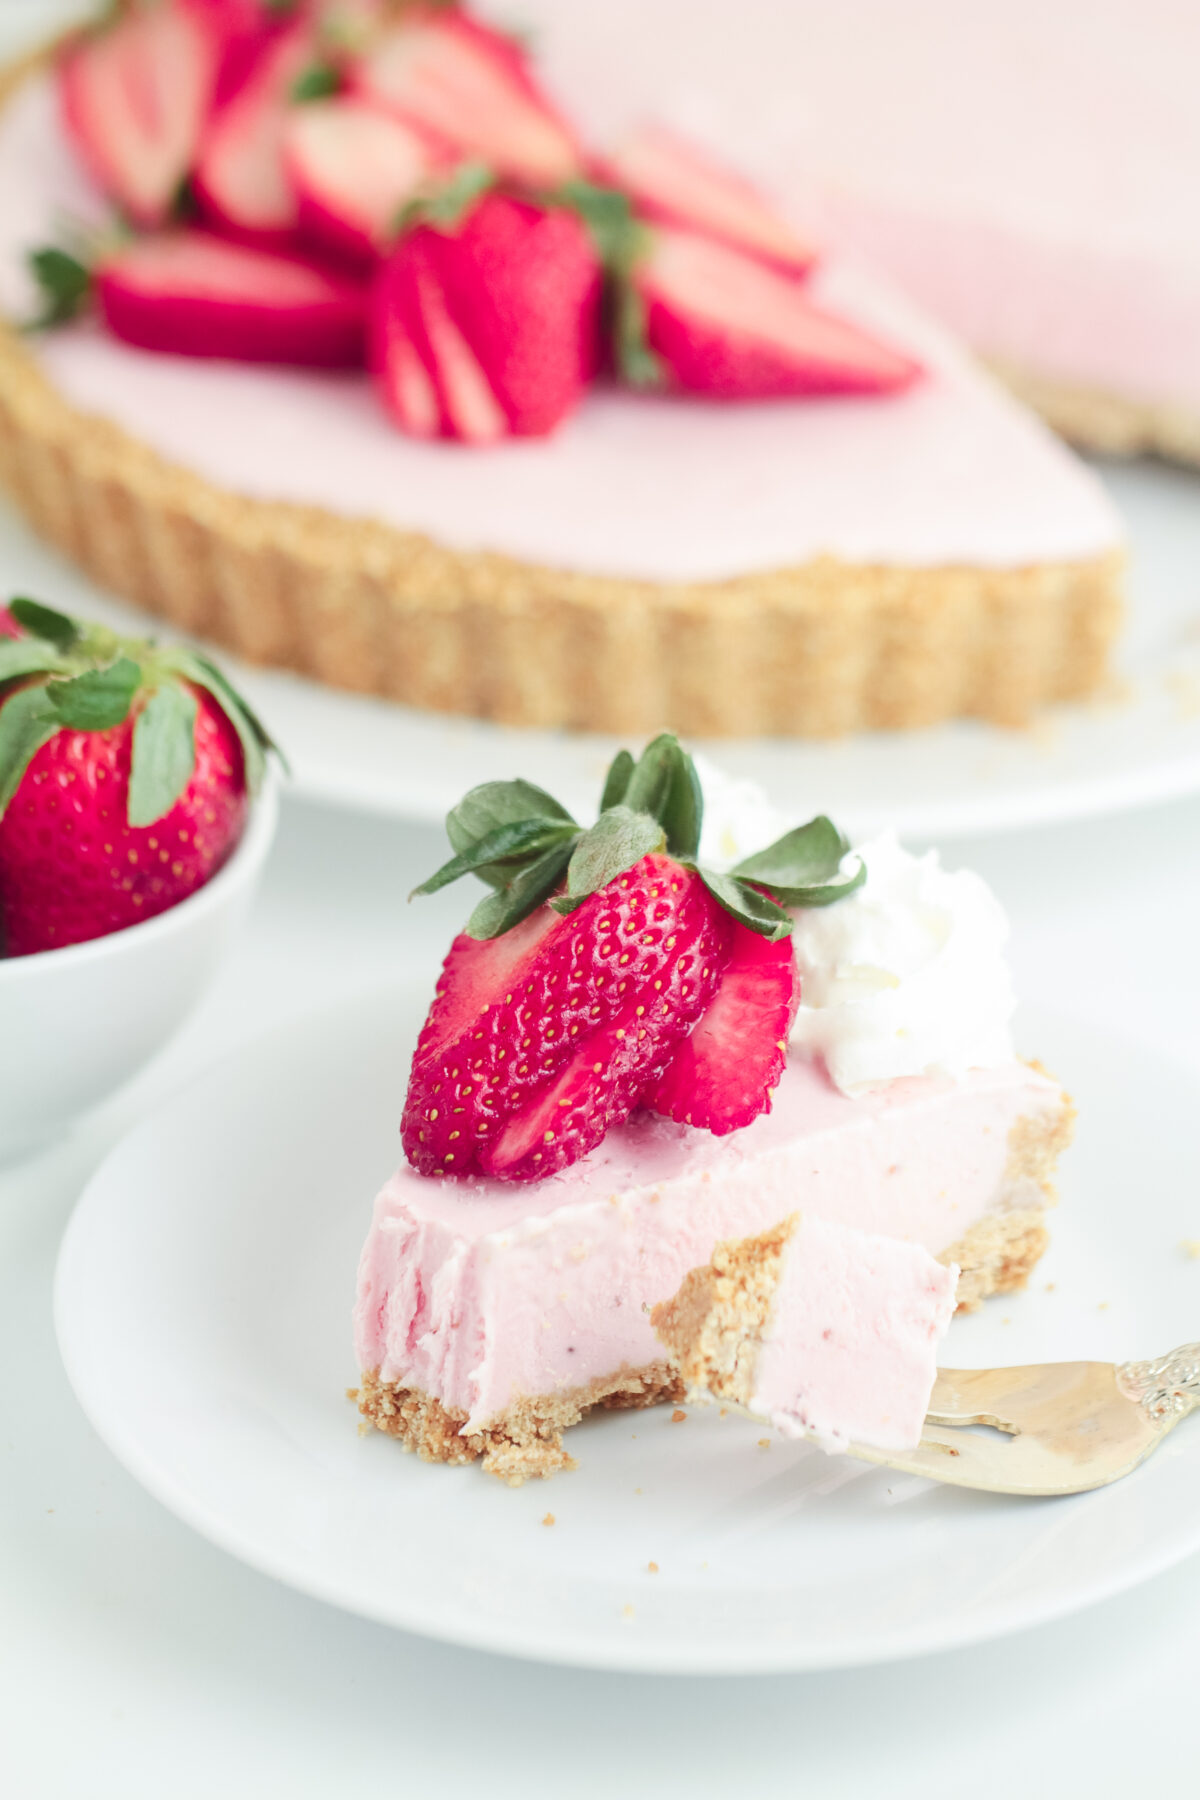 This easy No Bake Strawberry Cheesecake has a buttery cookie crust topped off with a creamy strawberry cheesecake filling.